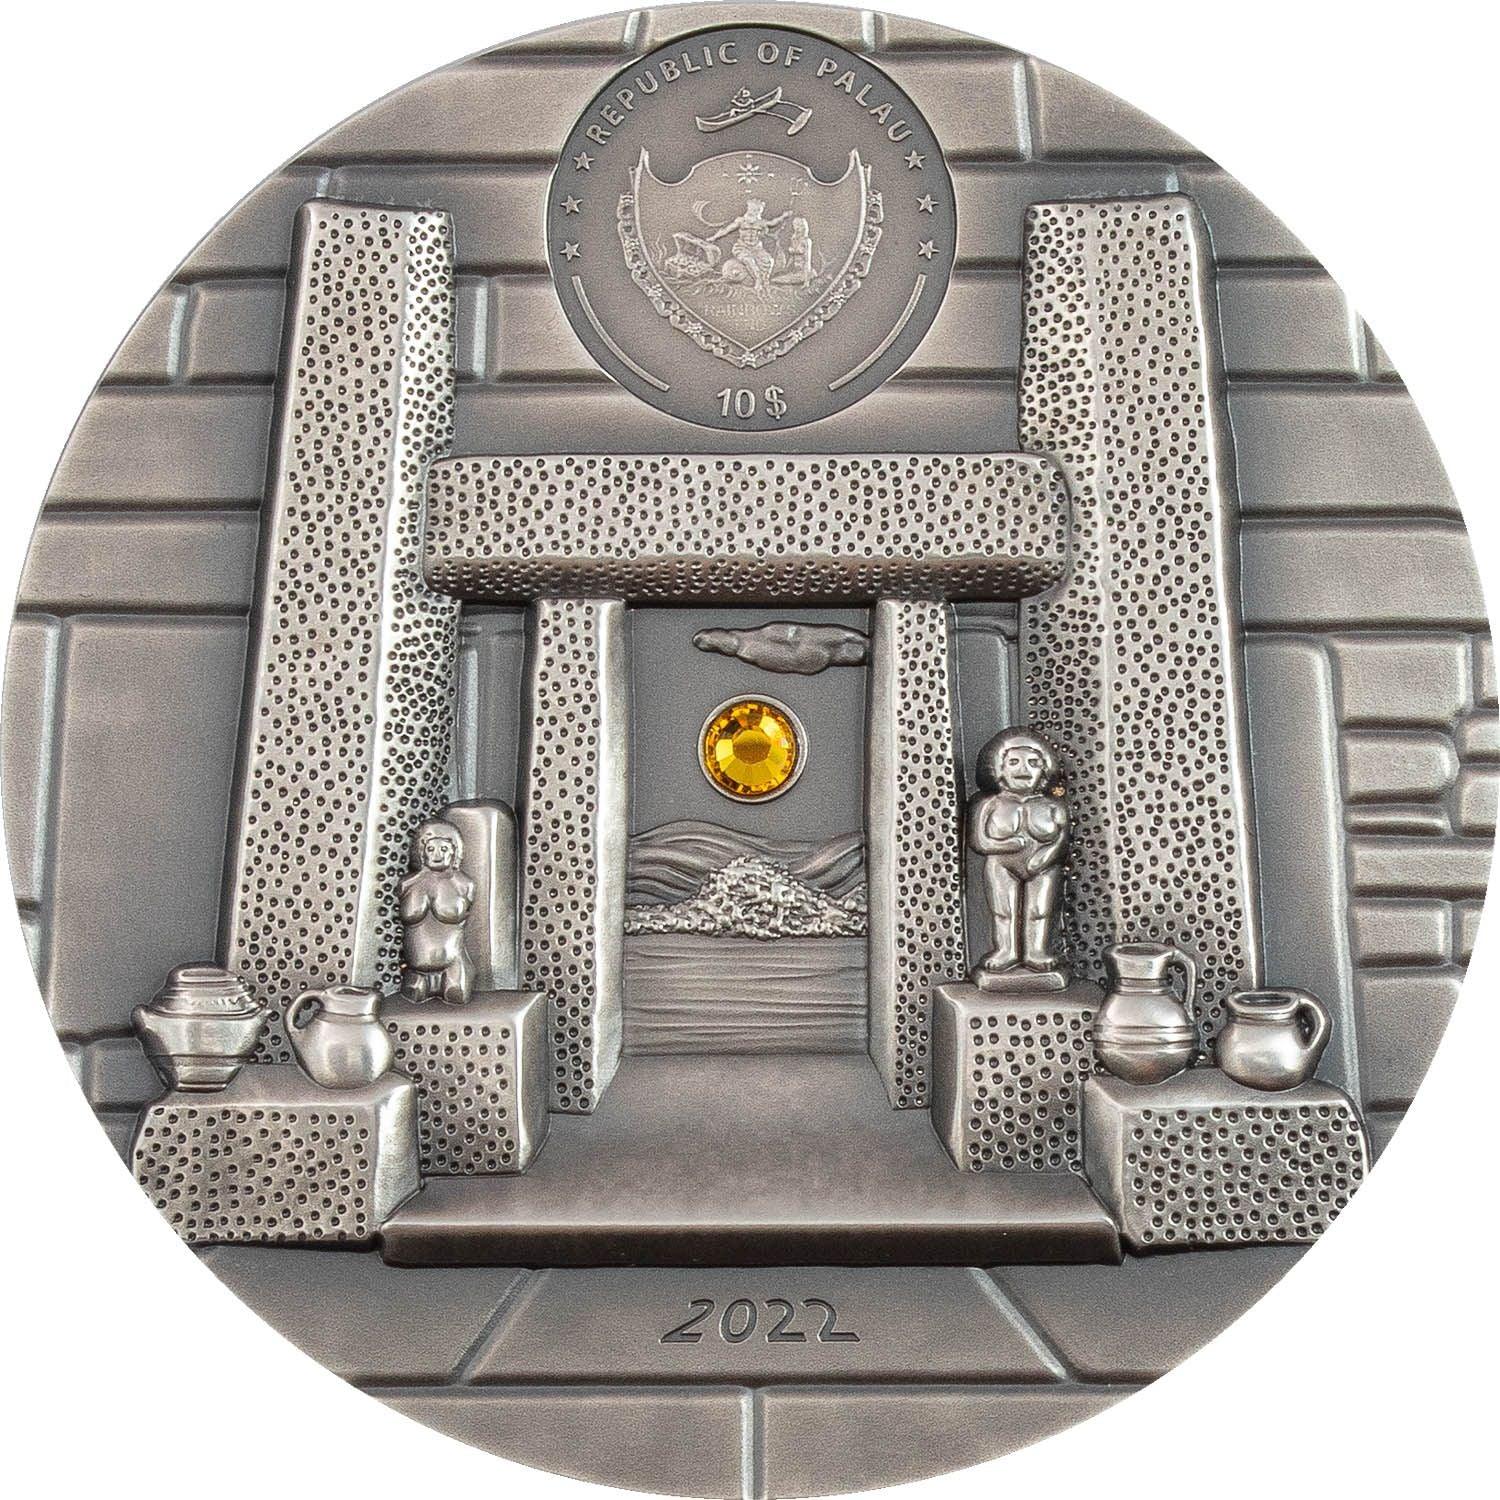 MNAJDRA TEMPLE Equinox and Solstice 2 Oz Silver Coin $10 Palau 2022 - PARTHAVA COIN